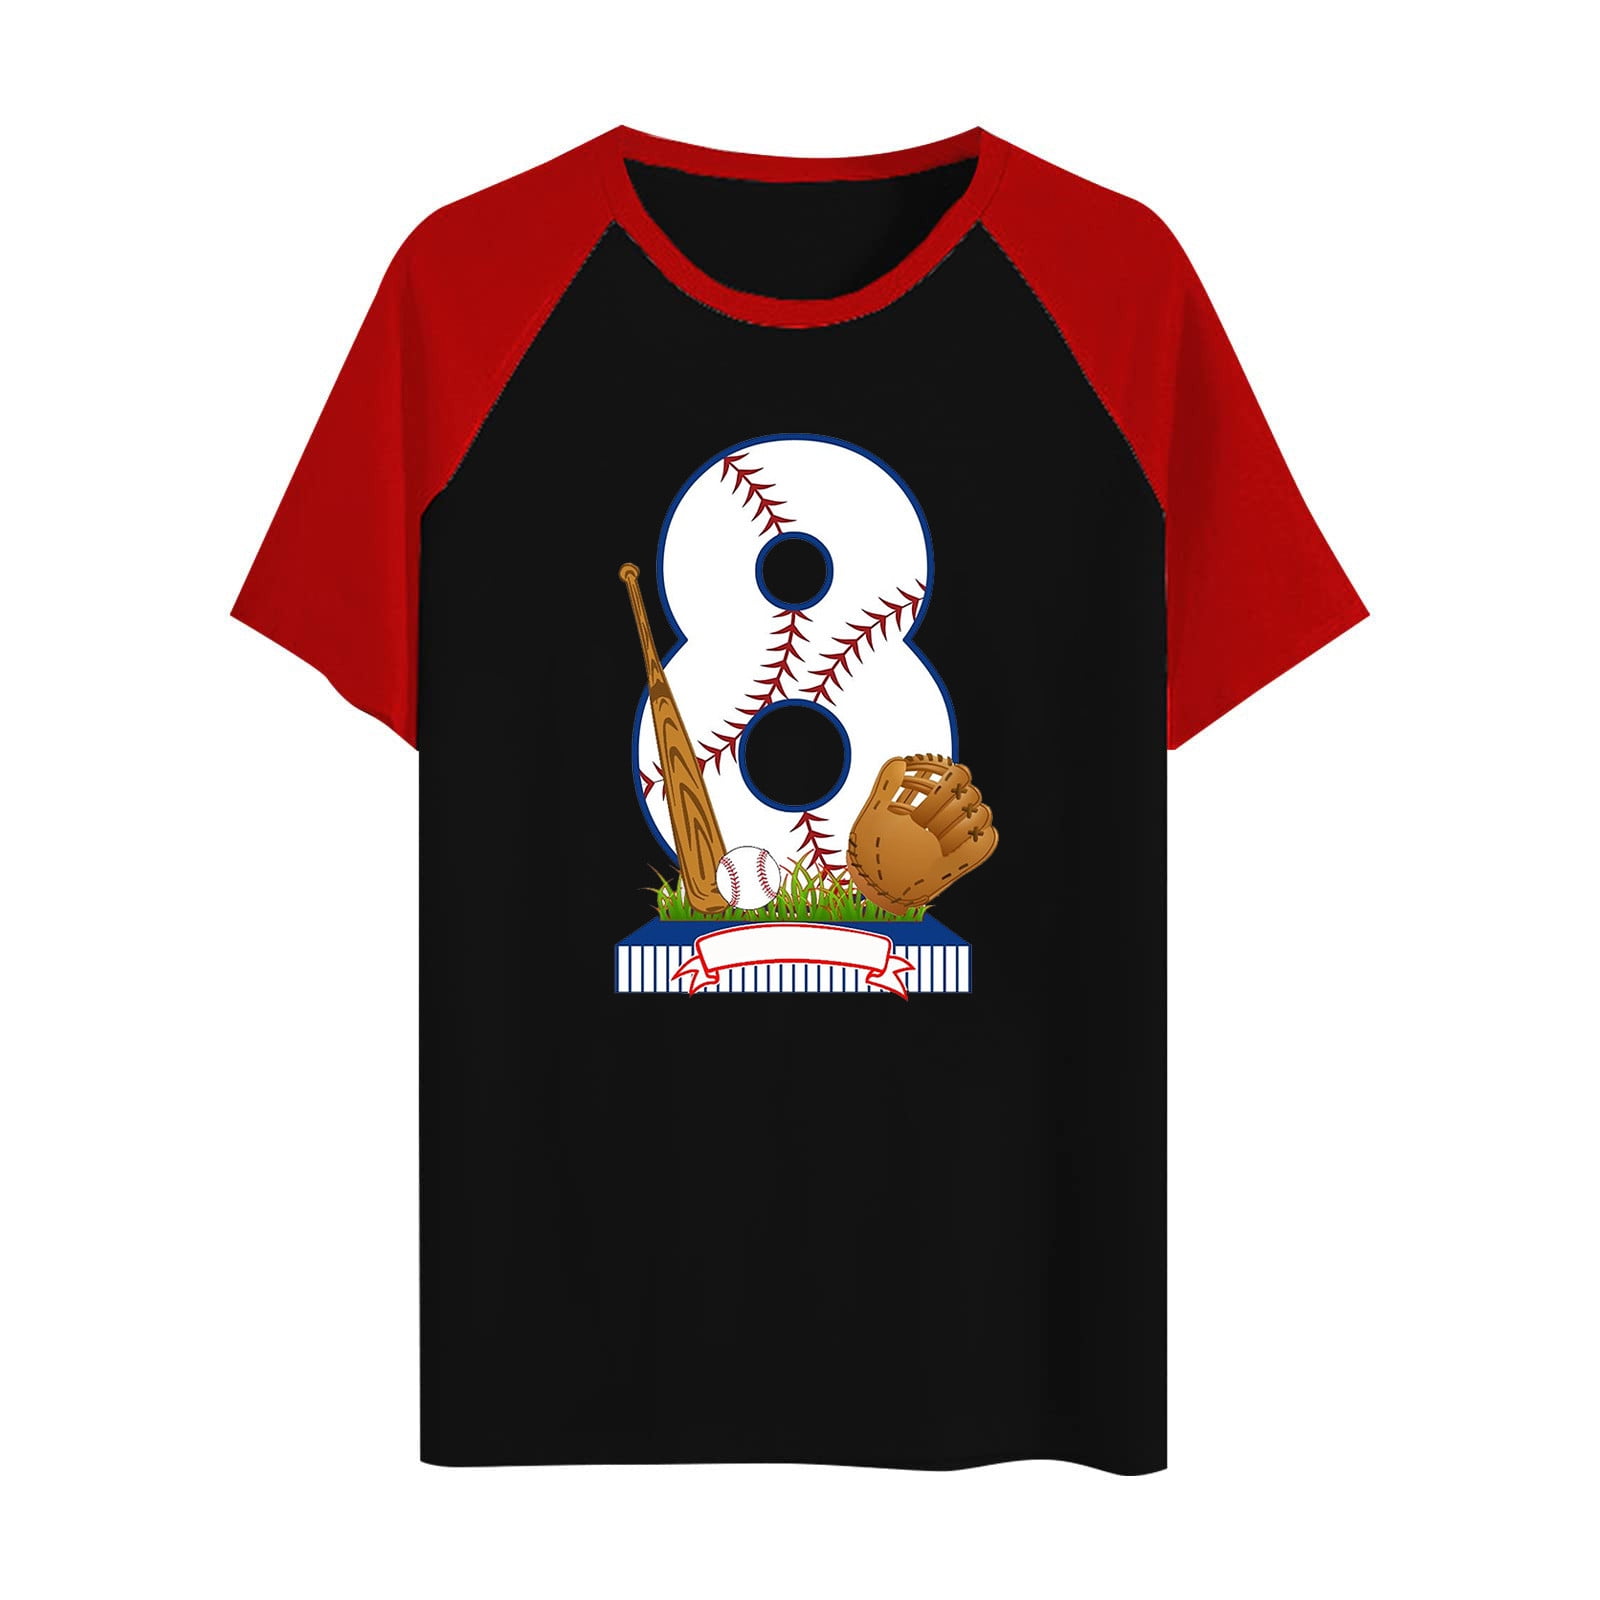 Lastesso Women Baseball and Heart Print Shirts Short Sleeve Colorblock T  Shirts Oversized Graphic Tees for Mother's Day 